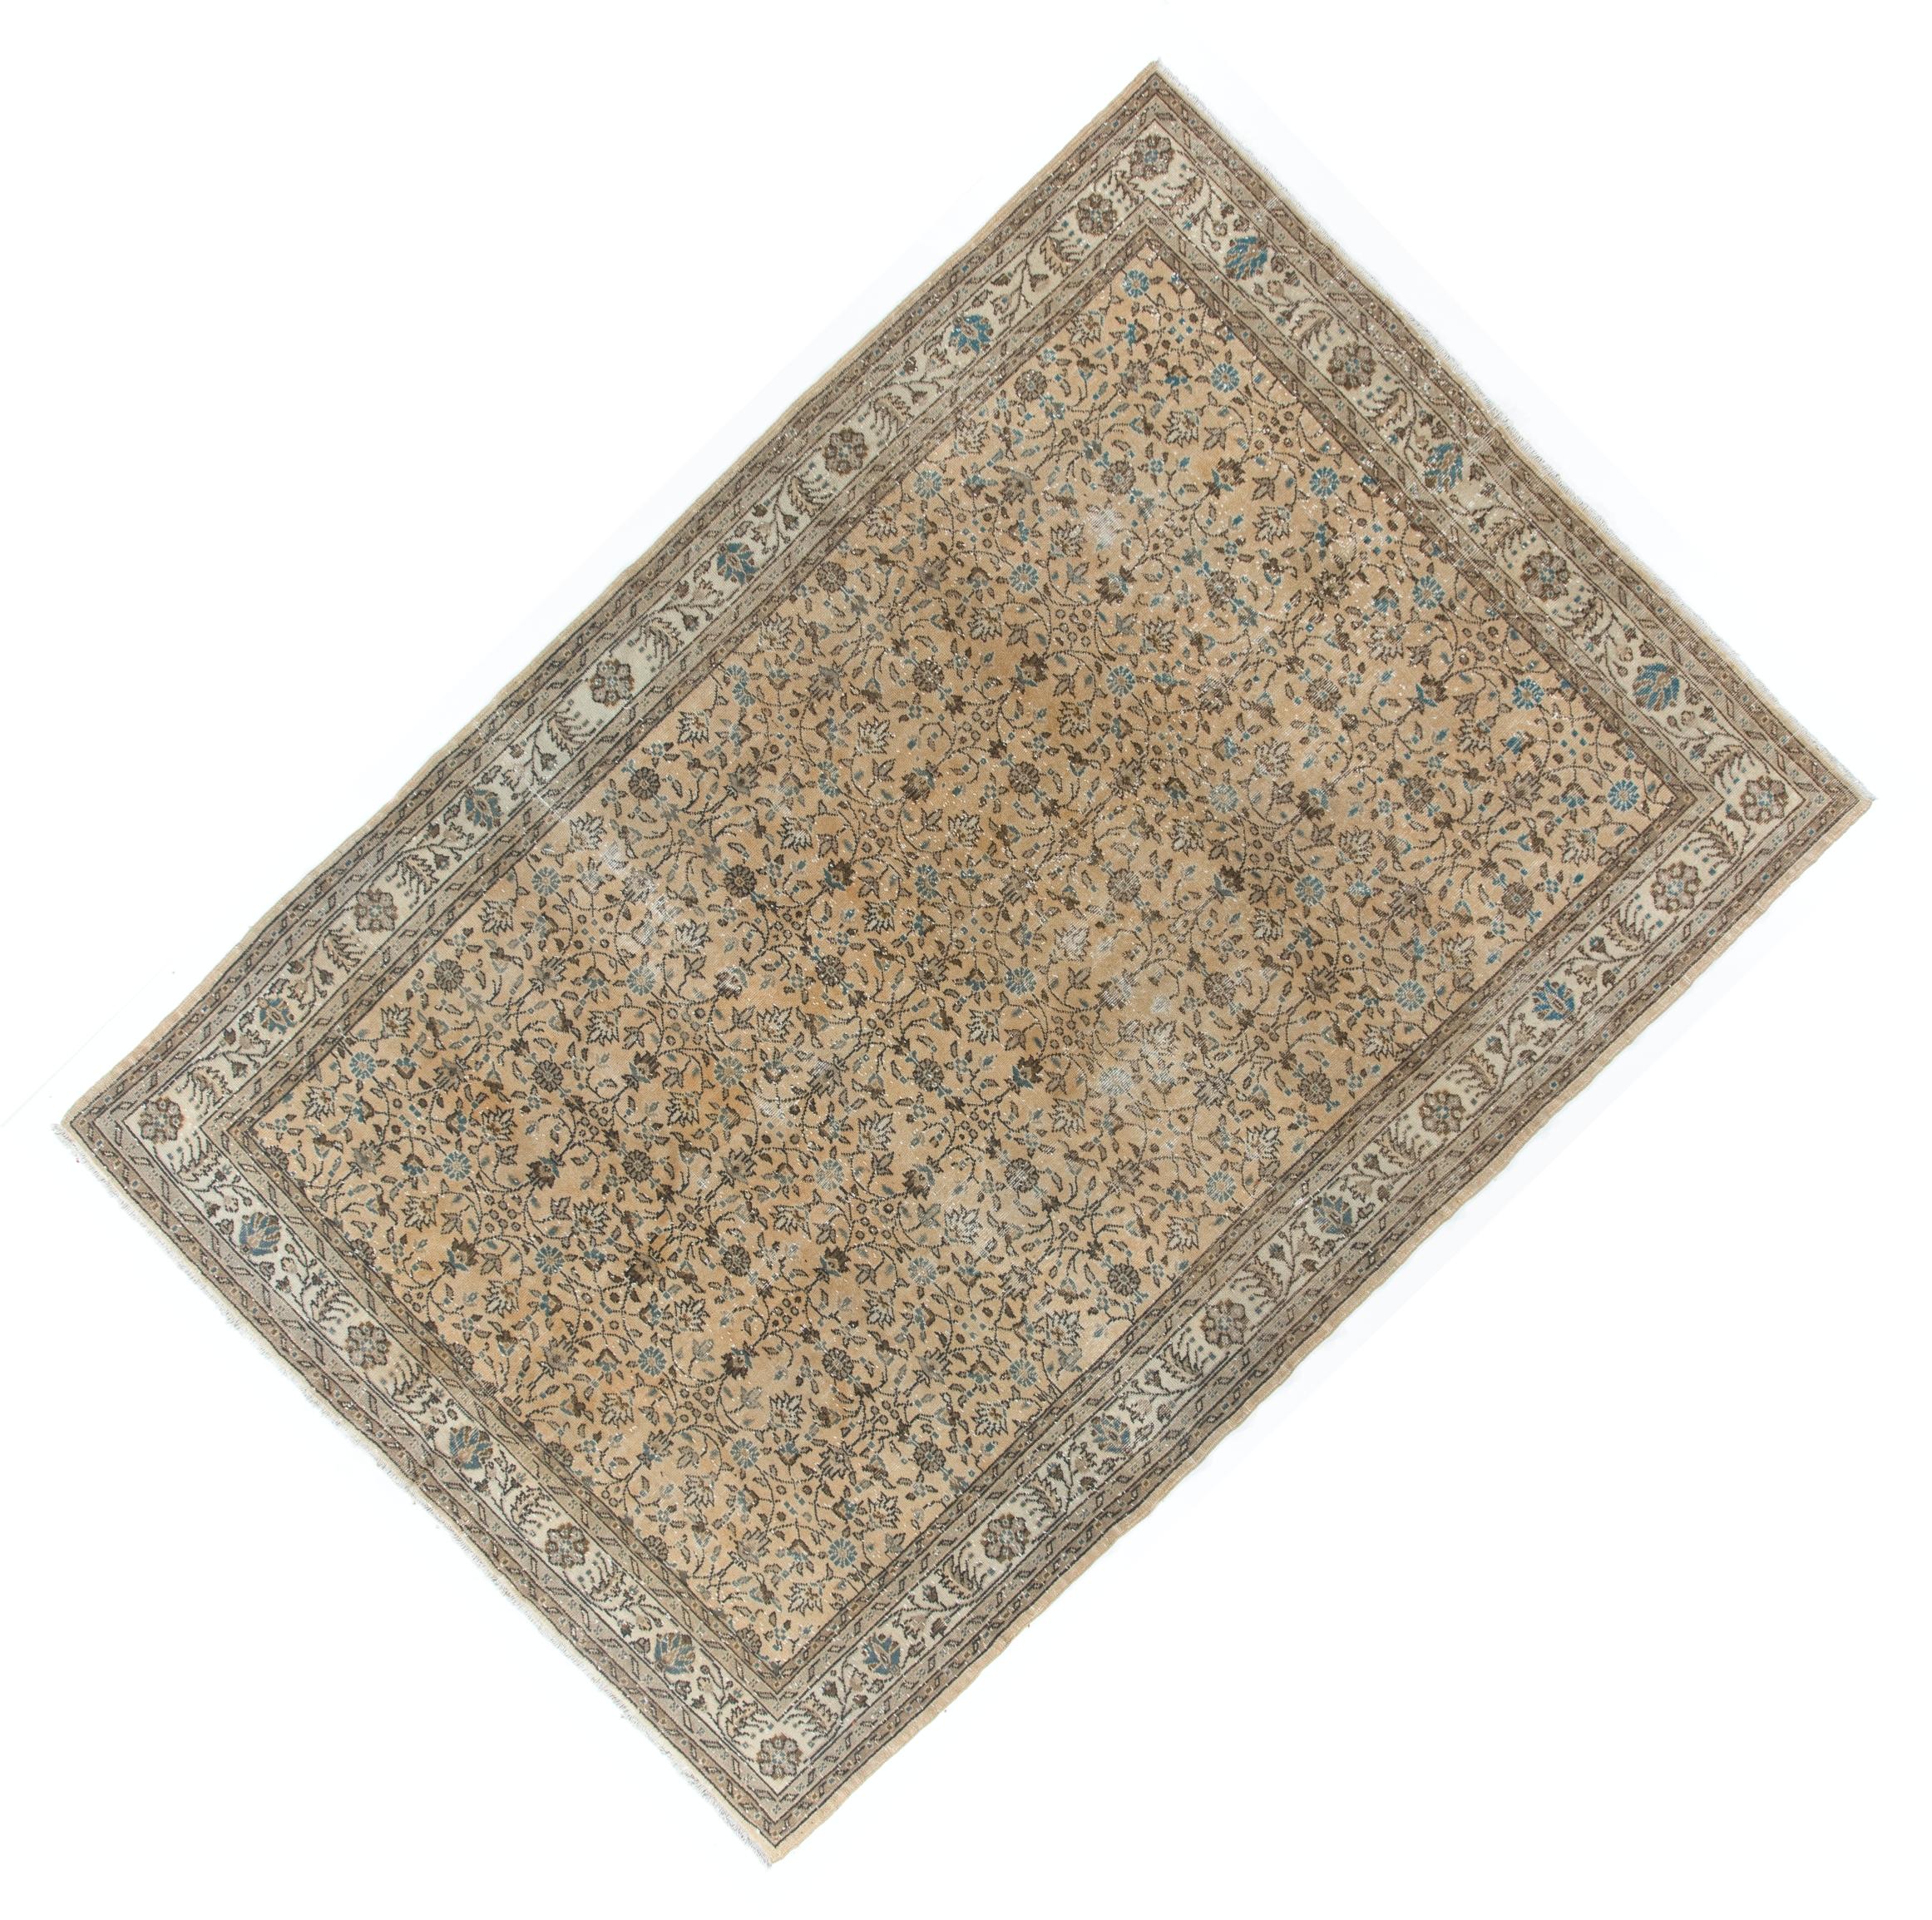 Hand-Knotted 7.5x11 Ft Vintage Turkish Wool Rug with Floral Design. Handmade Oriental Carpet For Sale